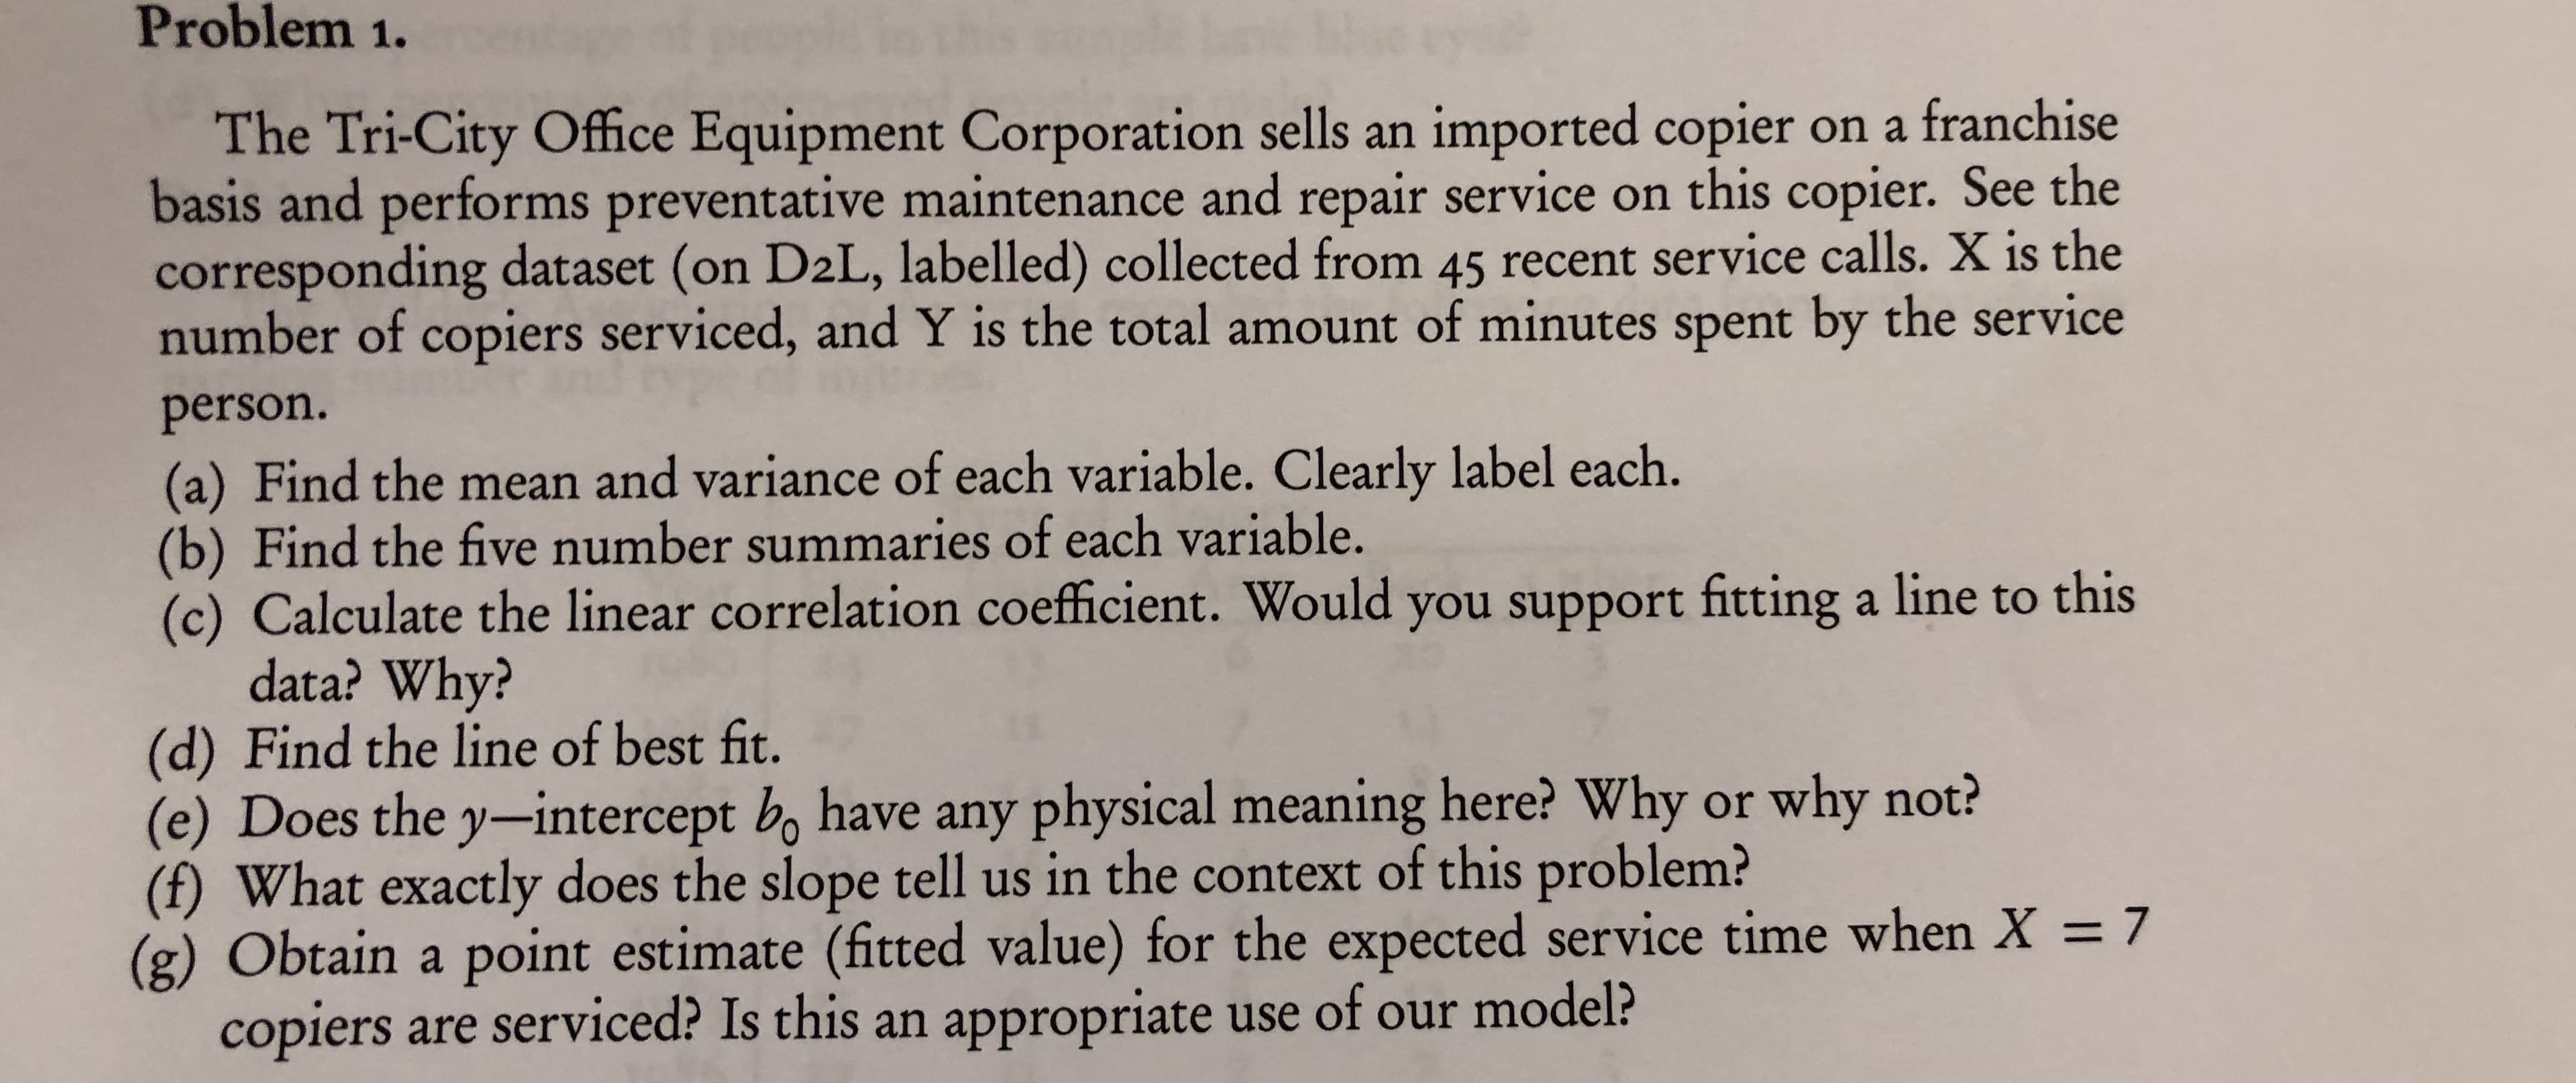 Problem 1.
The Tri-City Office Equipment Corporation sells an imported copier on a franchise
basis and performs preventative maintenance and repair service on this copier. See the
corresponding dataset (on D2L, labelled) collected from 45 recent service calls. X is the
number of copiers serviced, and Y is the total amount of minutes spent by the service
person.
(a) Find the mean and variance of each variable. Clearly label each.
(b) Find the five number summaries of each variable.
(c) Calculate the linear correlation coefficient. Would you support fitting a line to this
data? Why?
(d) Find the line of best fit.
(e) Does the y-intercept bo have any physical meaning here? Why or why not?
(f) What exactly does the slope tell us in the context of this problem?
(g) Obtain a point estimate (fitted value) for the expected service time when X 7
copiers are serviced? Is this an appropriate use of our model?
